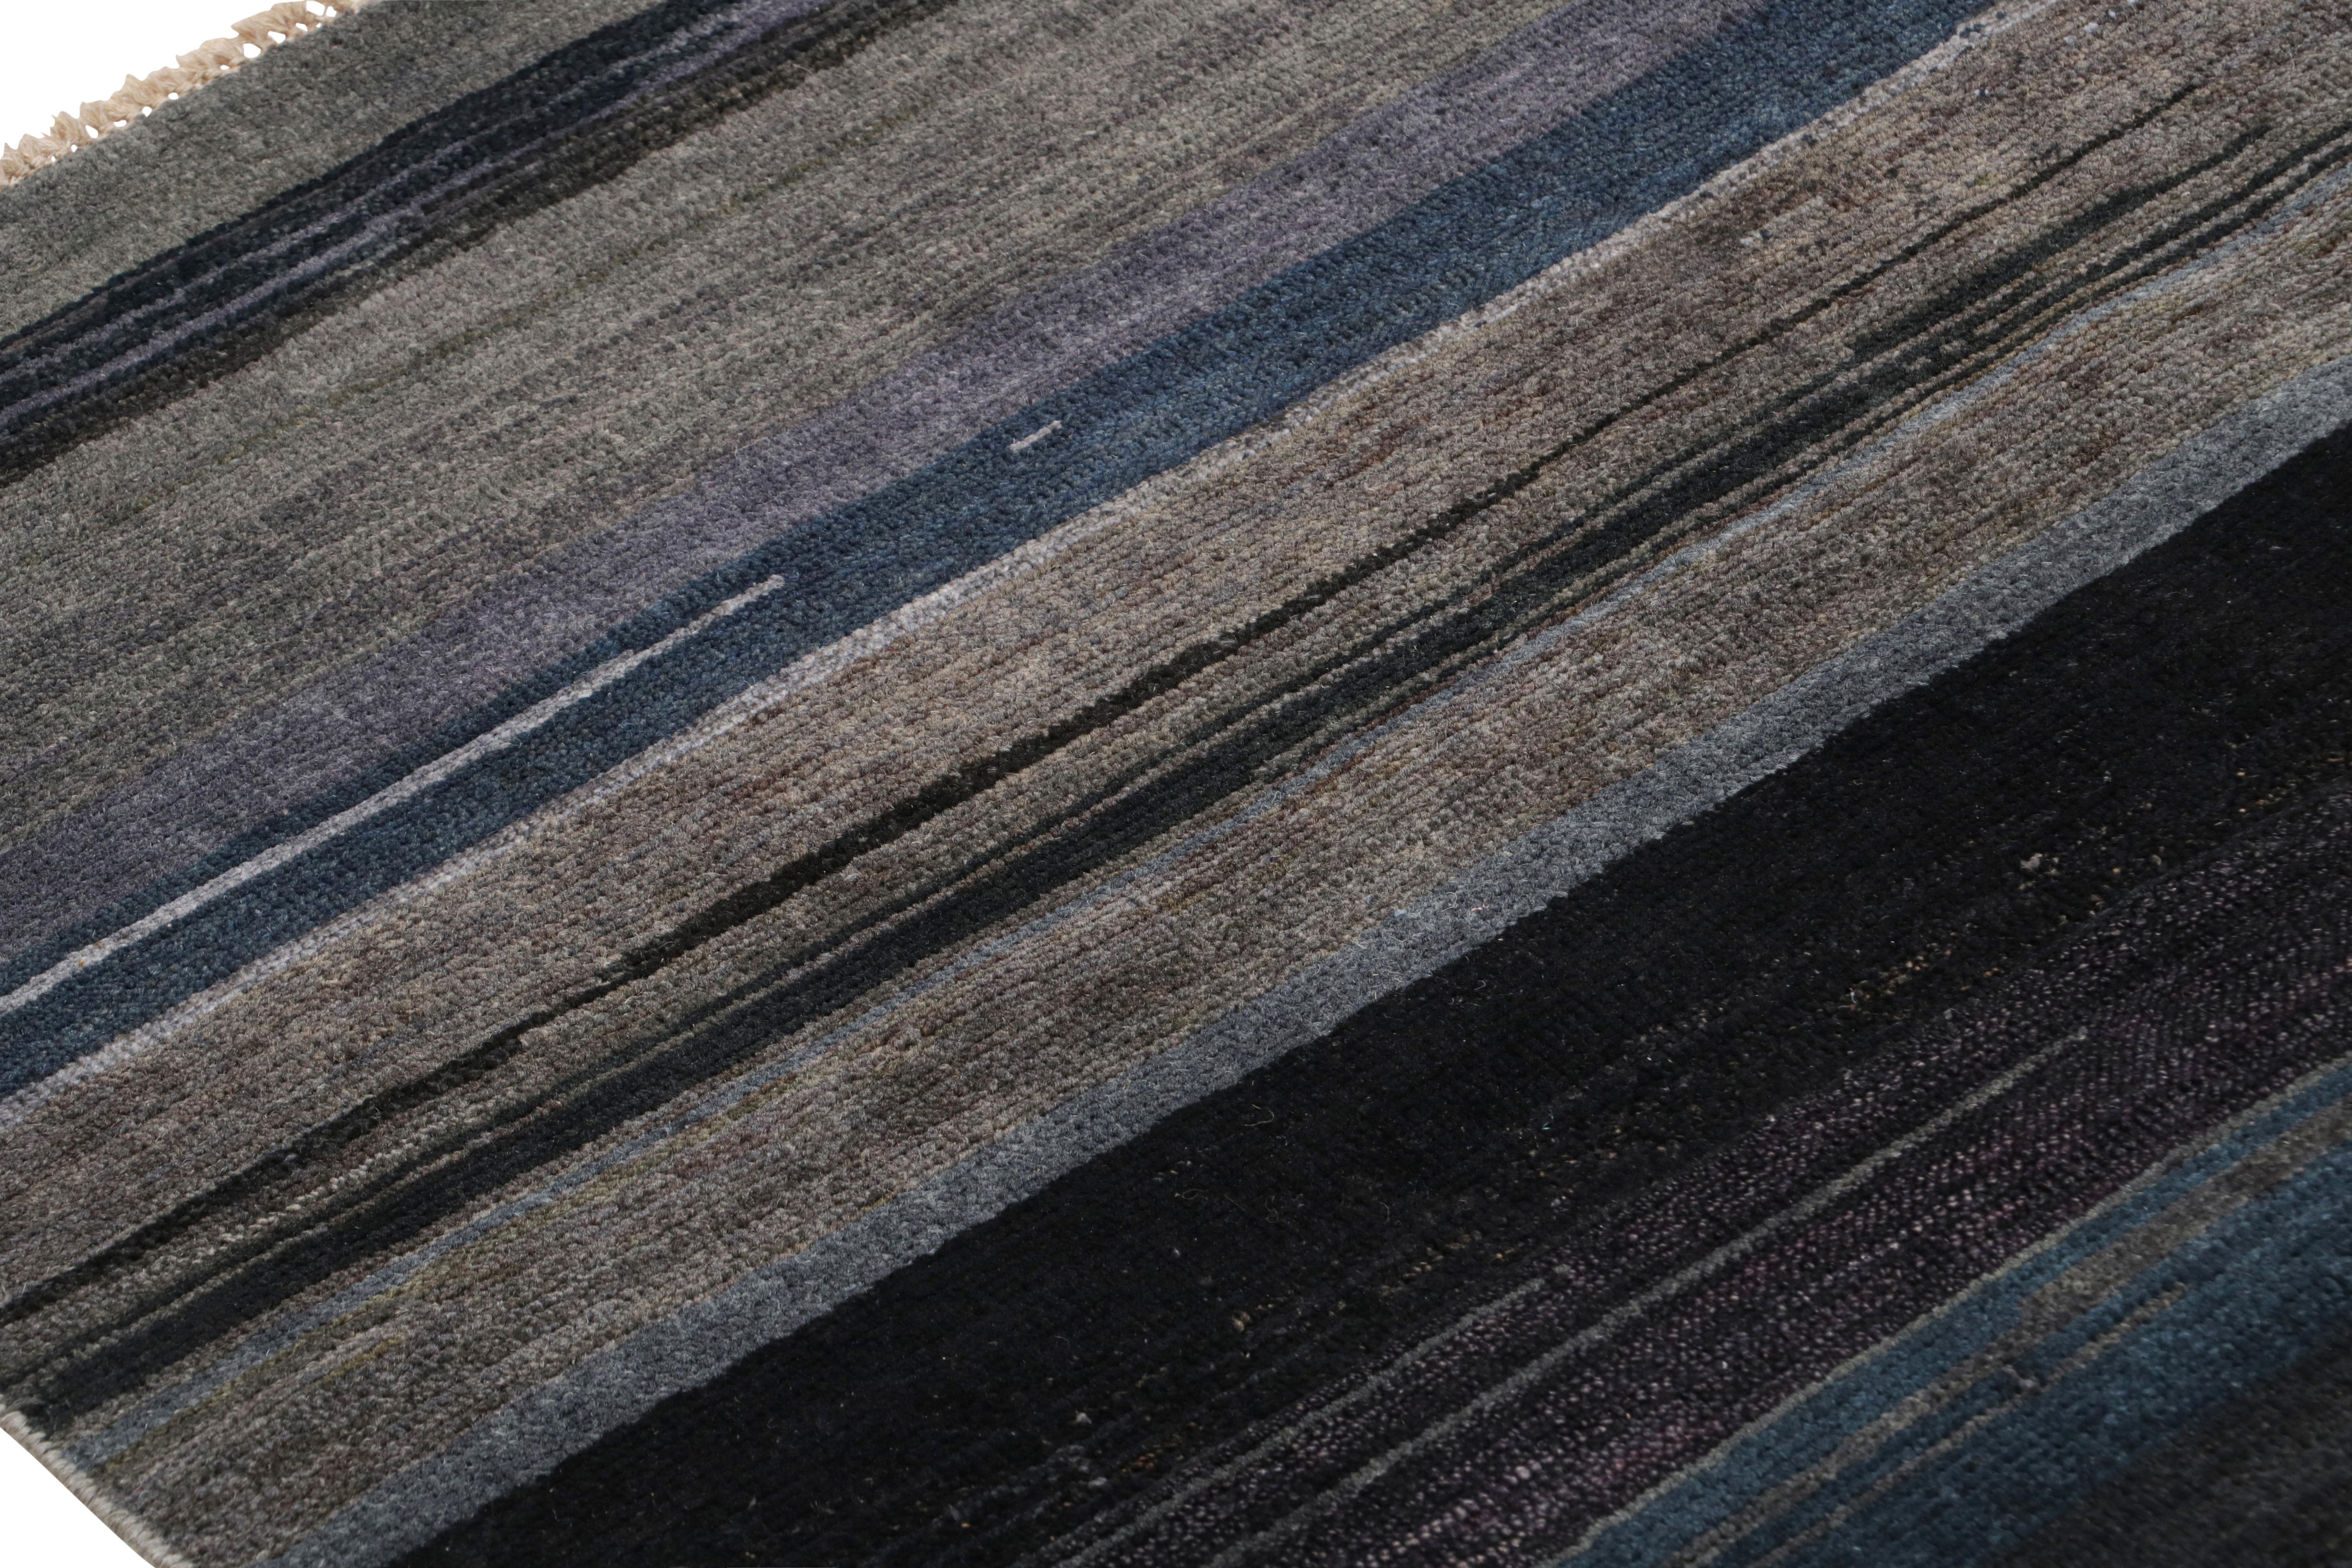 Rug & Kilim's Modern Textural Rug in Grisailles Tone Stripes and Striae im Zustand „Neu“ im Angebot in Long Island City, NY